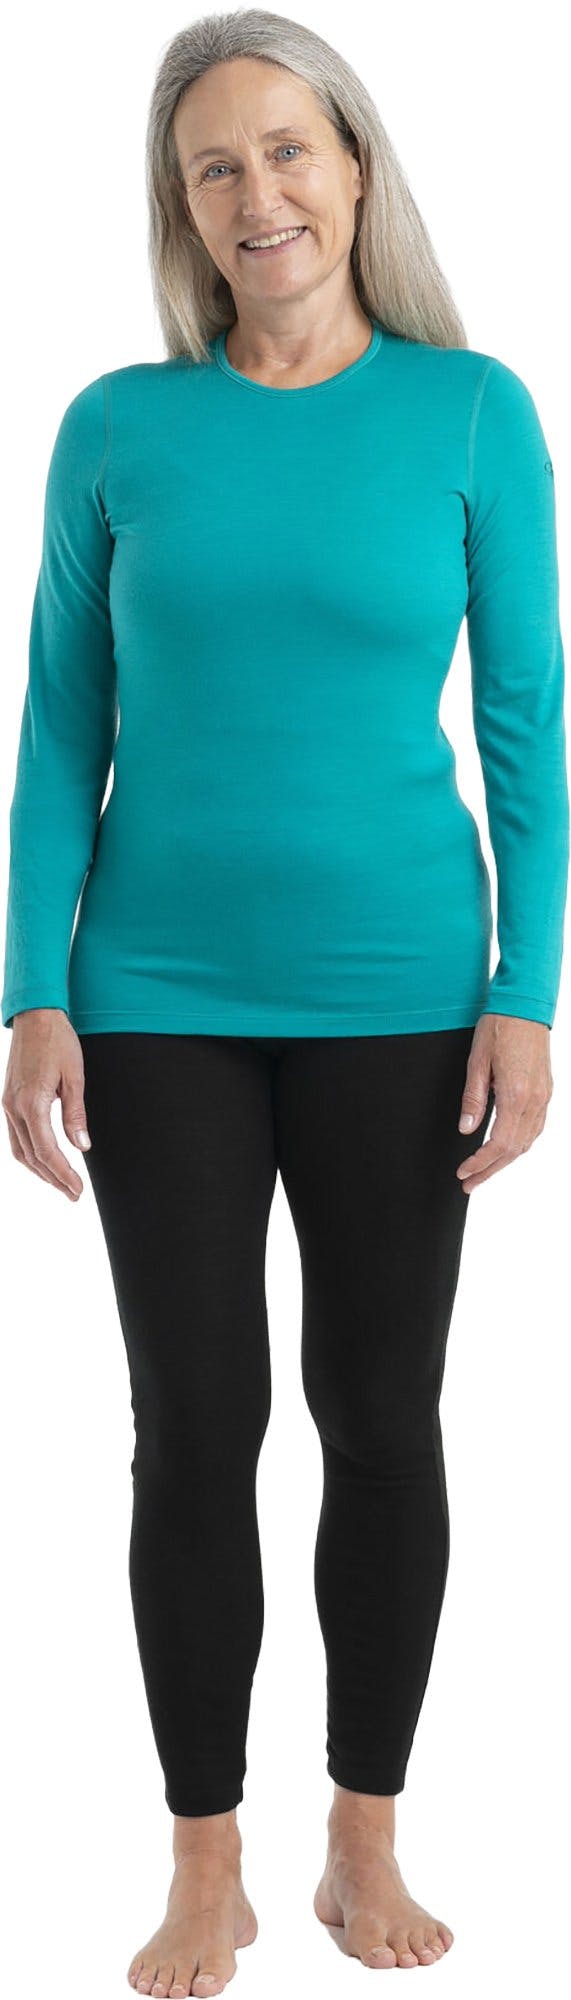 Product image for 200 Oasis Long Sleeve Crewe - Women's